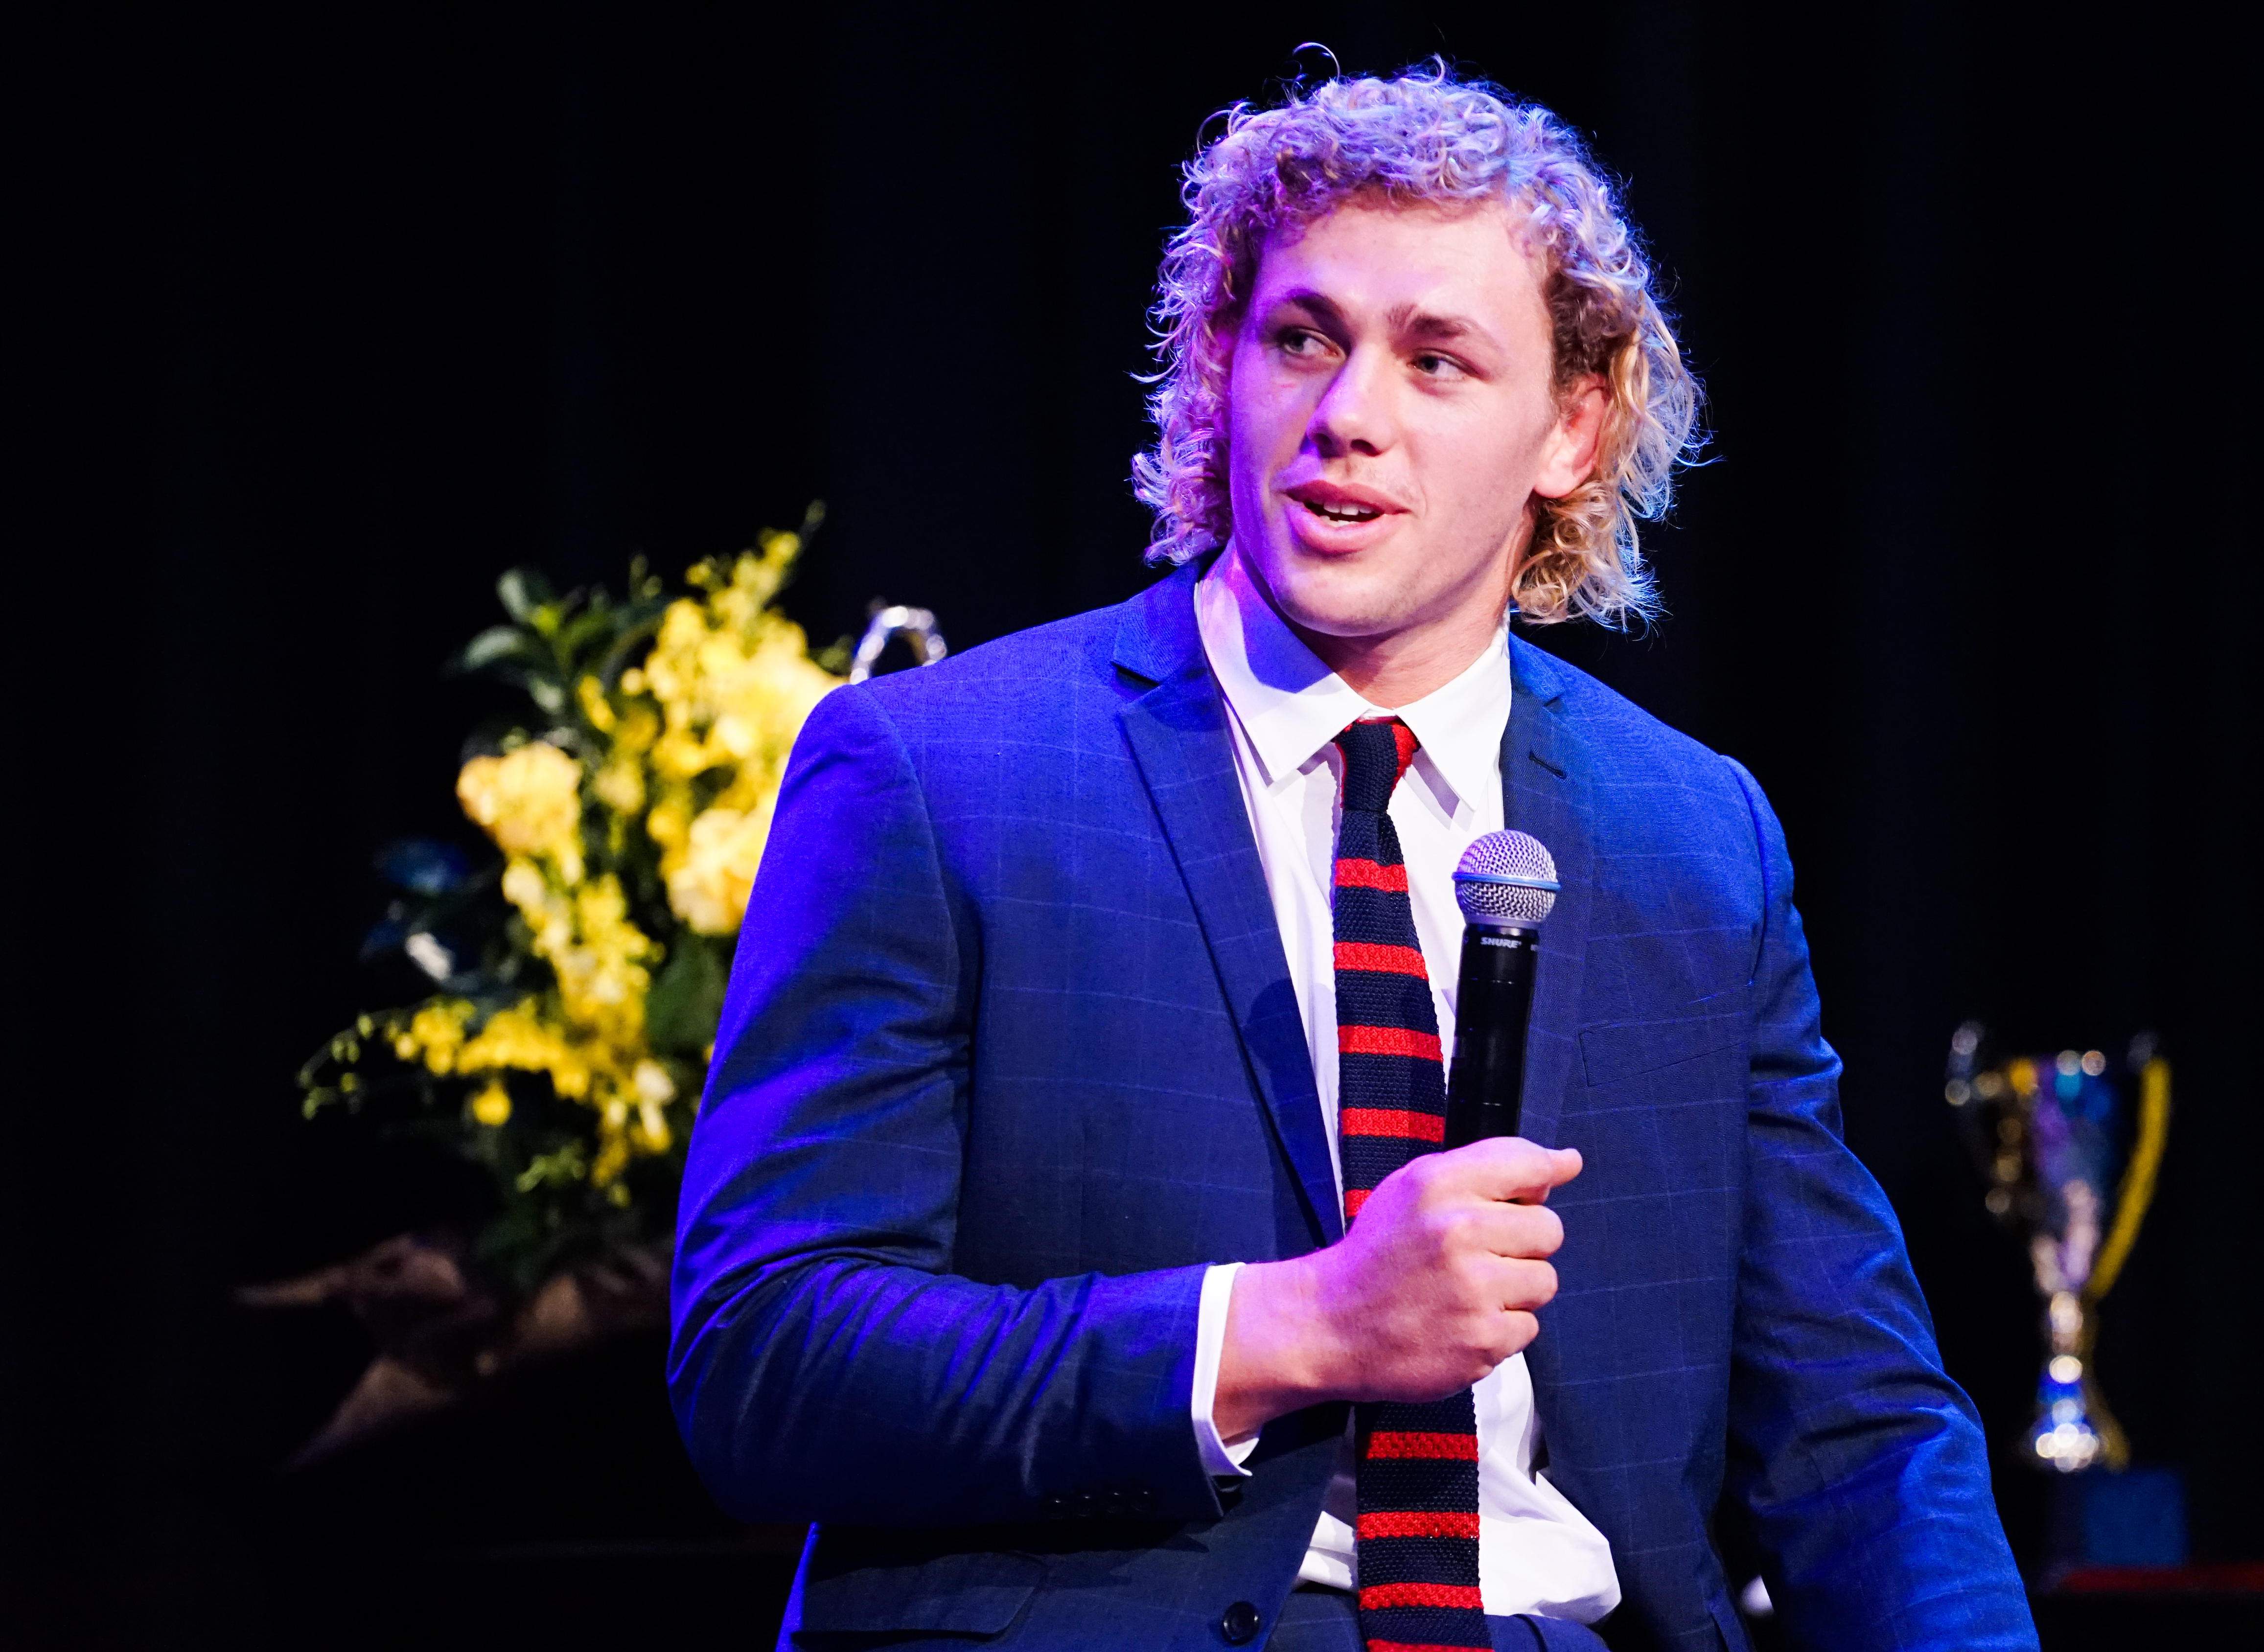 Ned Hanigan at the 2019 Blues Dinner